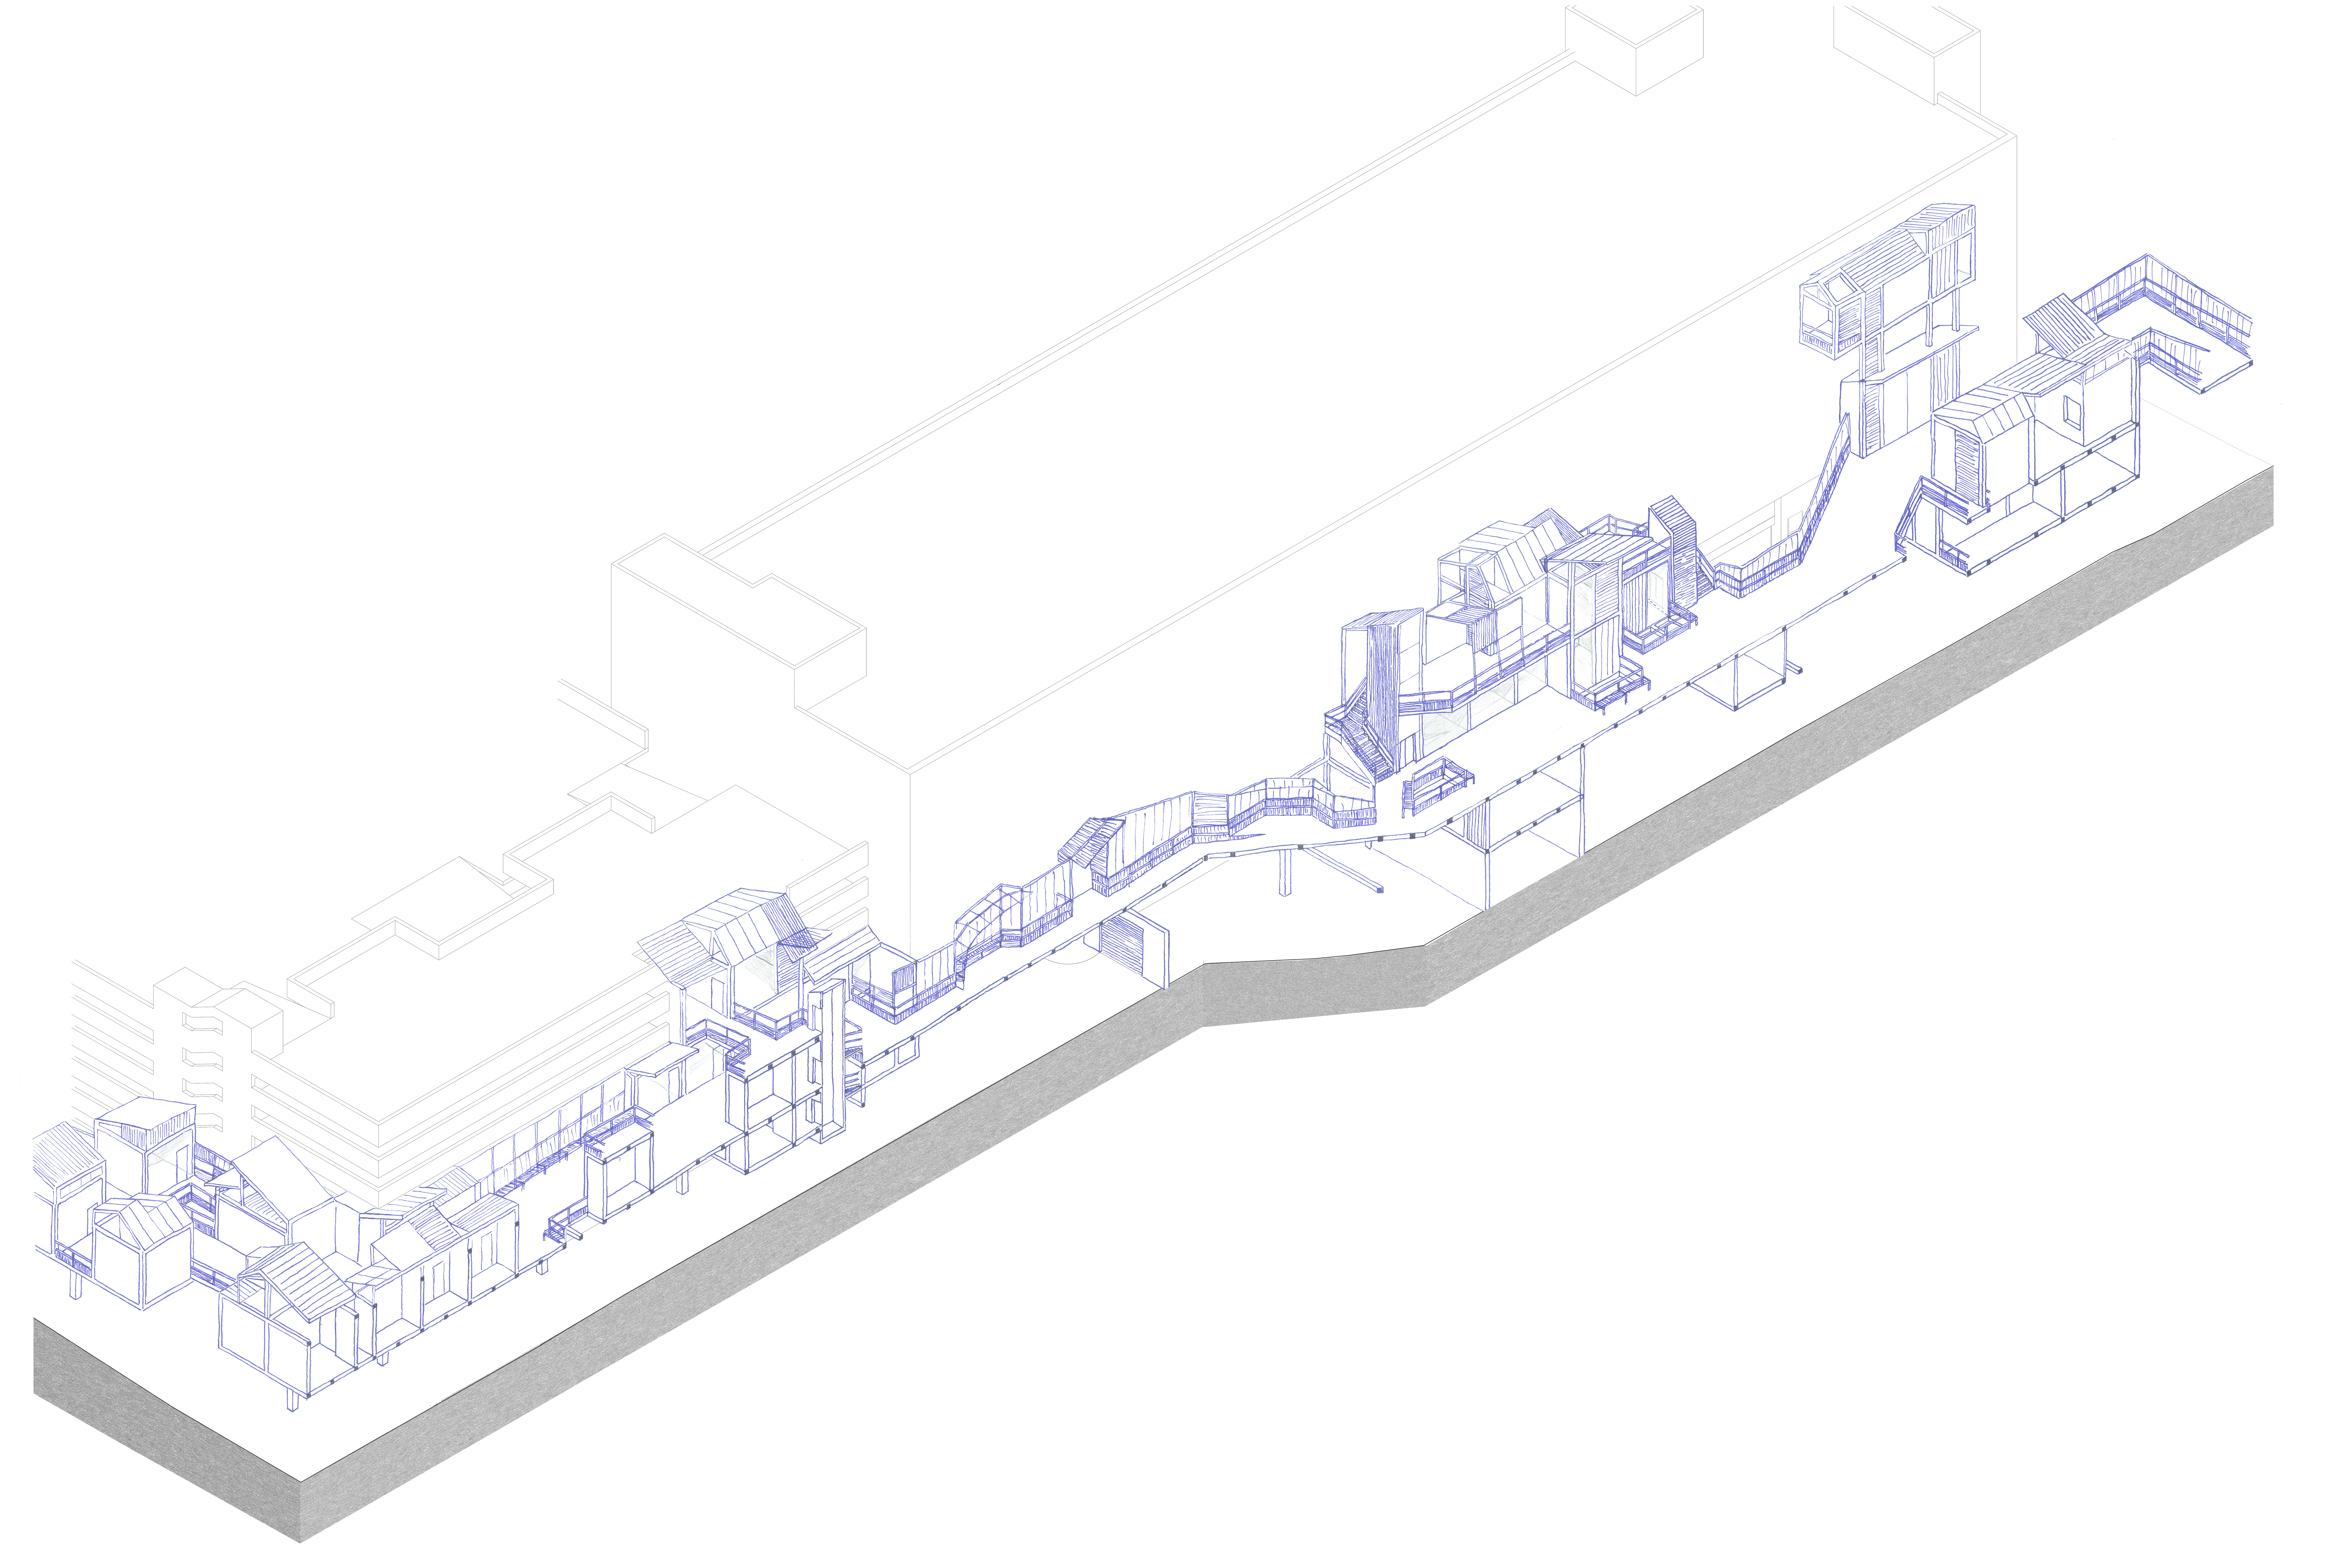 Mike Jones - Axonometric showing high level route